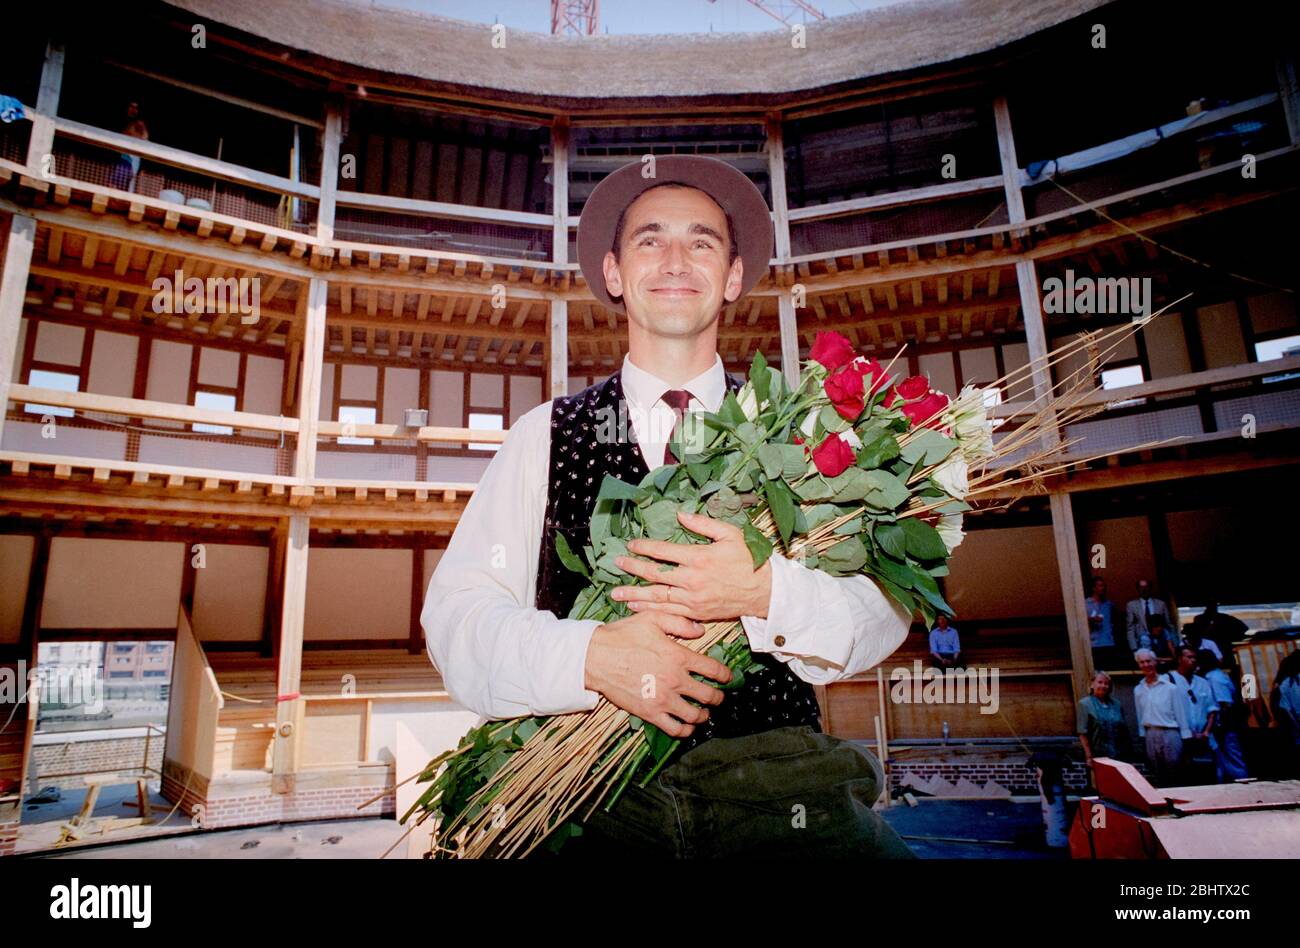 Actor Mark Rylance at London's Globe Theatre in the days during its construction in the mid 1990s. Mark Rylance became the first artistic director of Shakespeare's Globe Theatre in 1995. Stock Photo